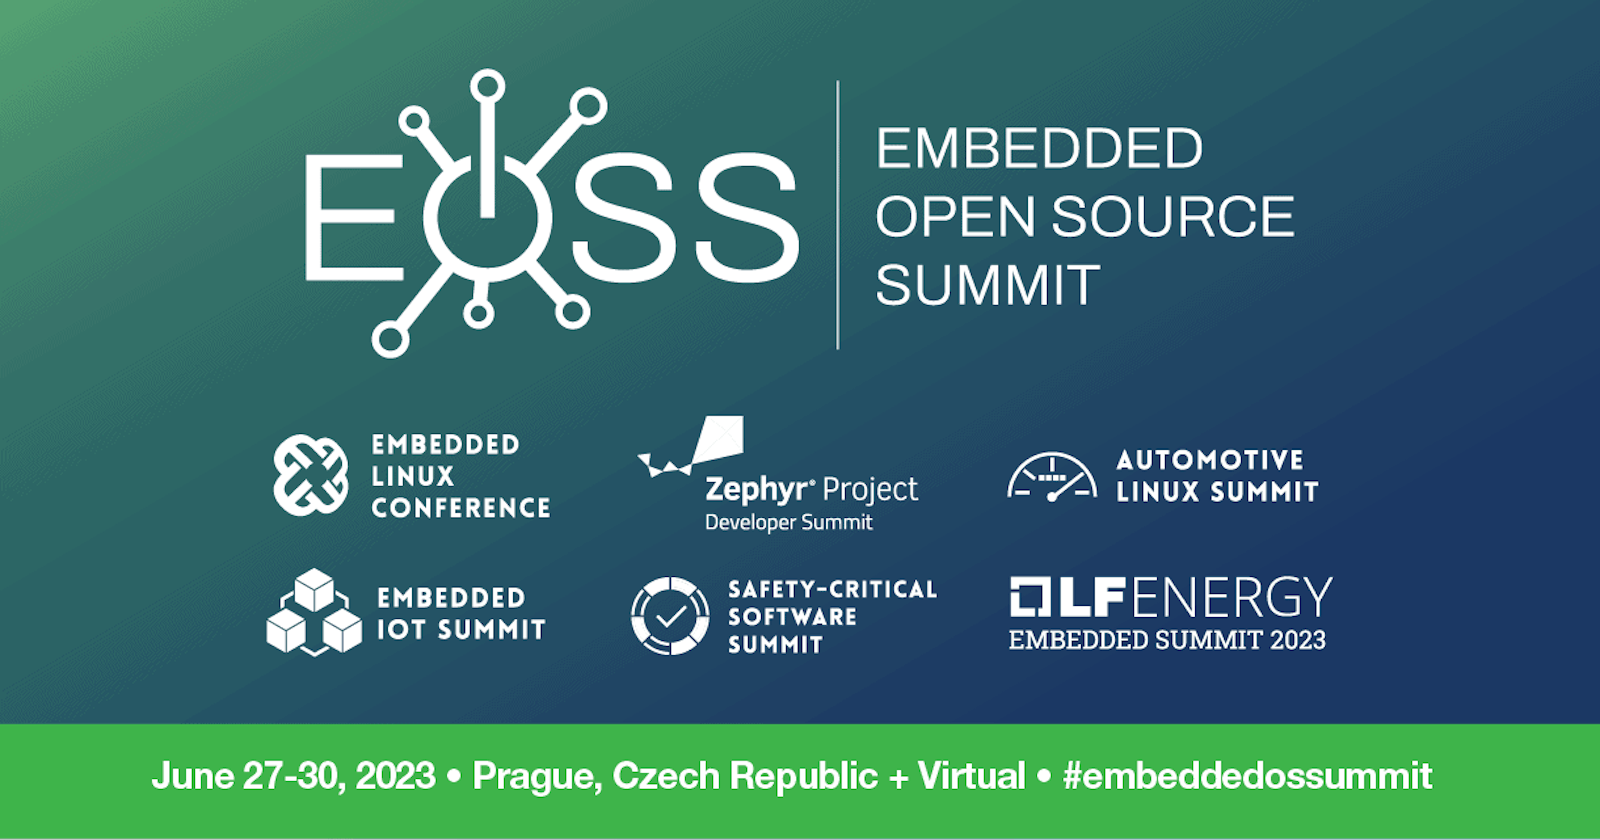 My Embedded Open Source Summit 2023 Experience